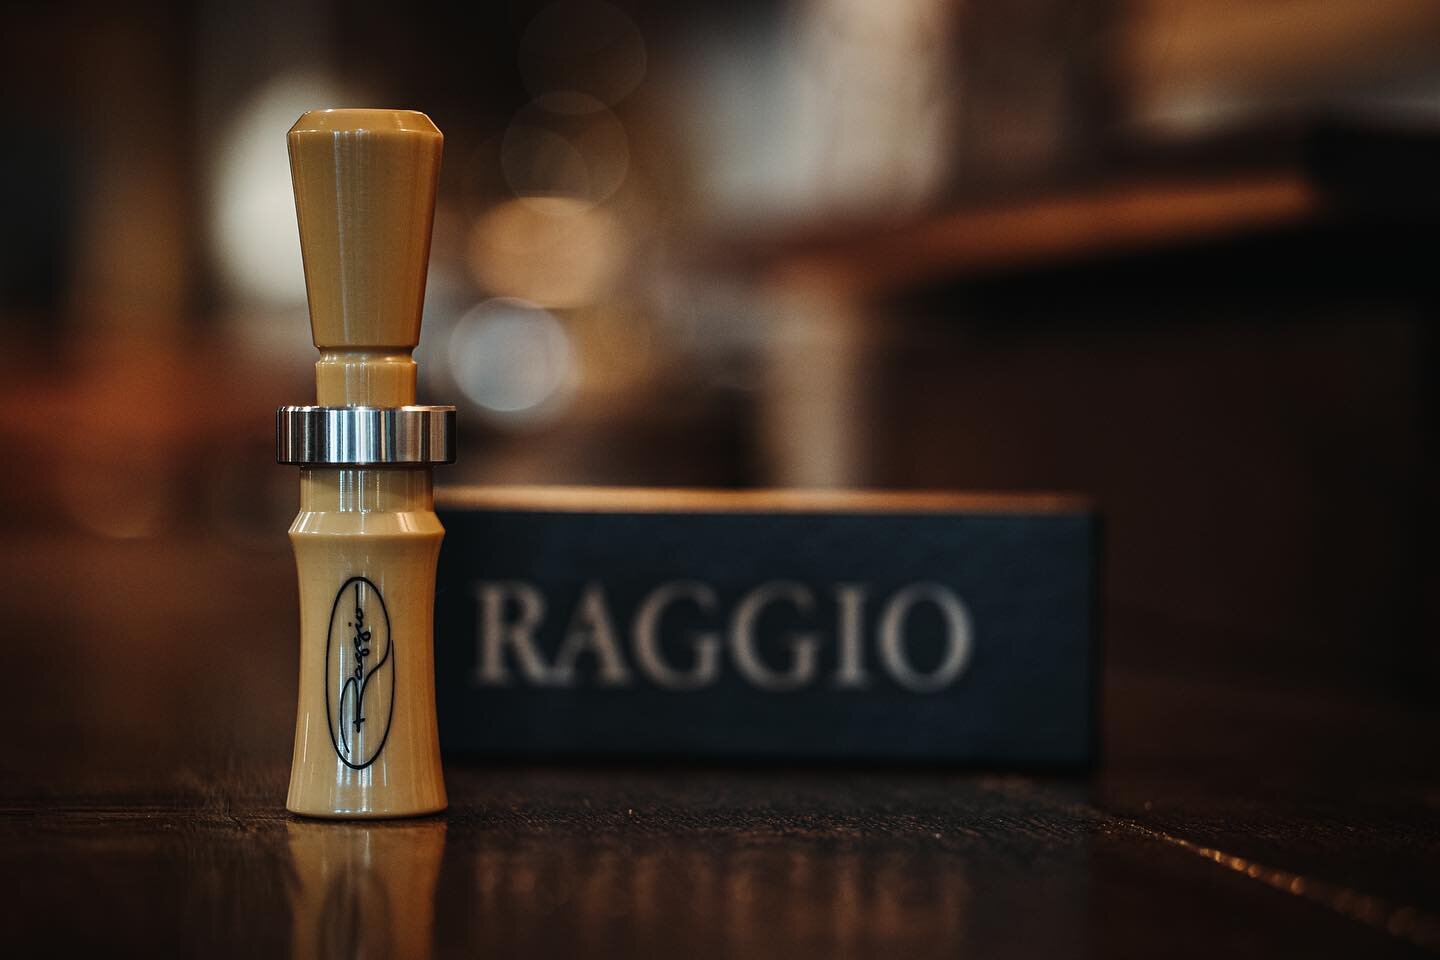 You guys have been asking for years&hellip;. Well, here they are. Raggio acrylics. Available at the grand opening tomorrow at @raggiomercantile . Then online next week.
.
.
#duckcalls #smallshop #smallrun